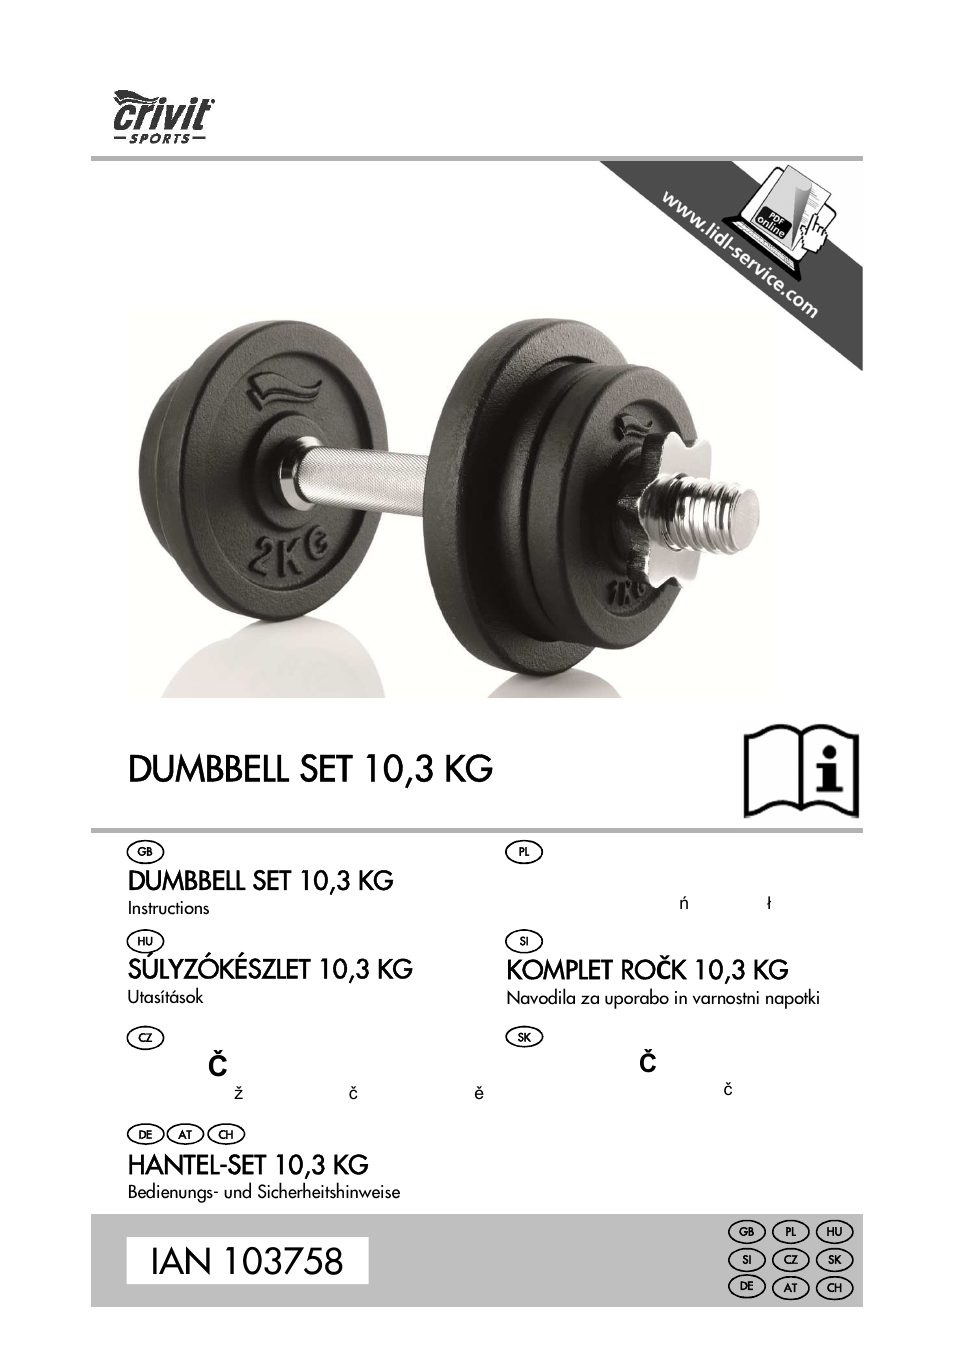 Crivit Dumbbell Set User Manual | 20 pages | Also for: 5kg Kettlebell, 2.5kg  Kettlebell, 10.3kg Dumbbell Set